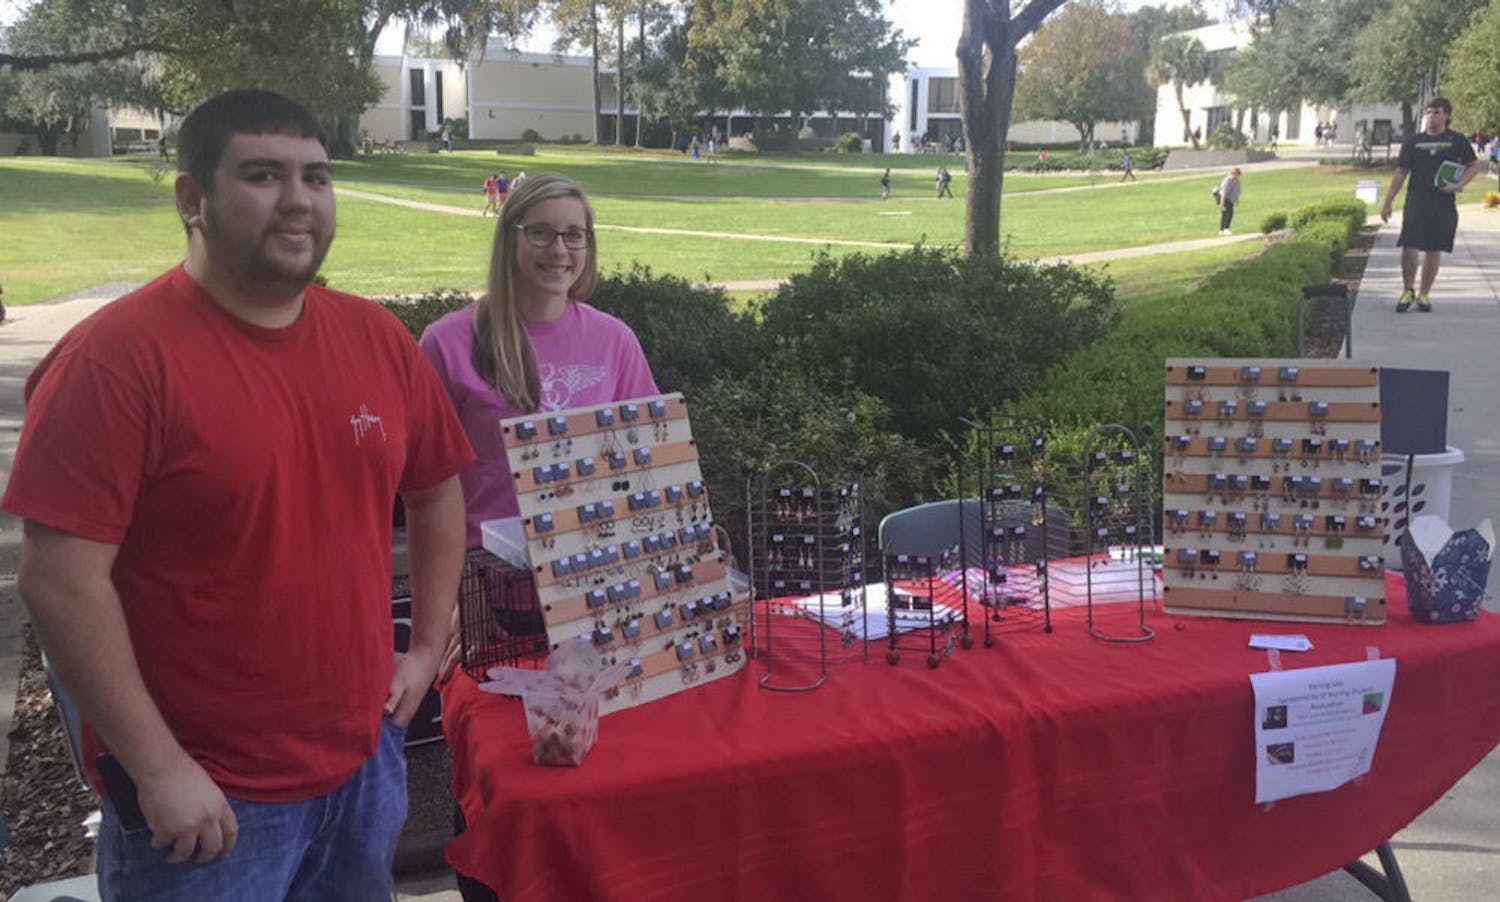 Tyler Welz (left), a 22-year-old Santa Fe nursing senior, and Caroline Lewis, a 21-year-old Santa Fe nursing senior, sell earrings on Nov. 30, 2015, outside Santa Fe’s food court to fund a trip to the Nursing Student Association's annual convention in Orlando. The earring sale ends today at 2 p.m.